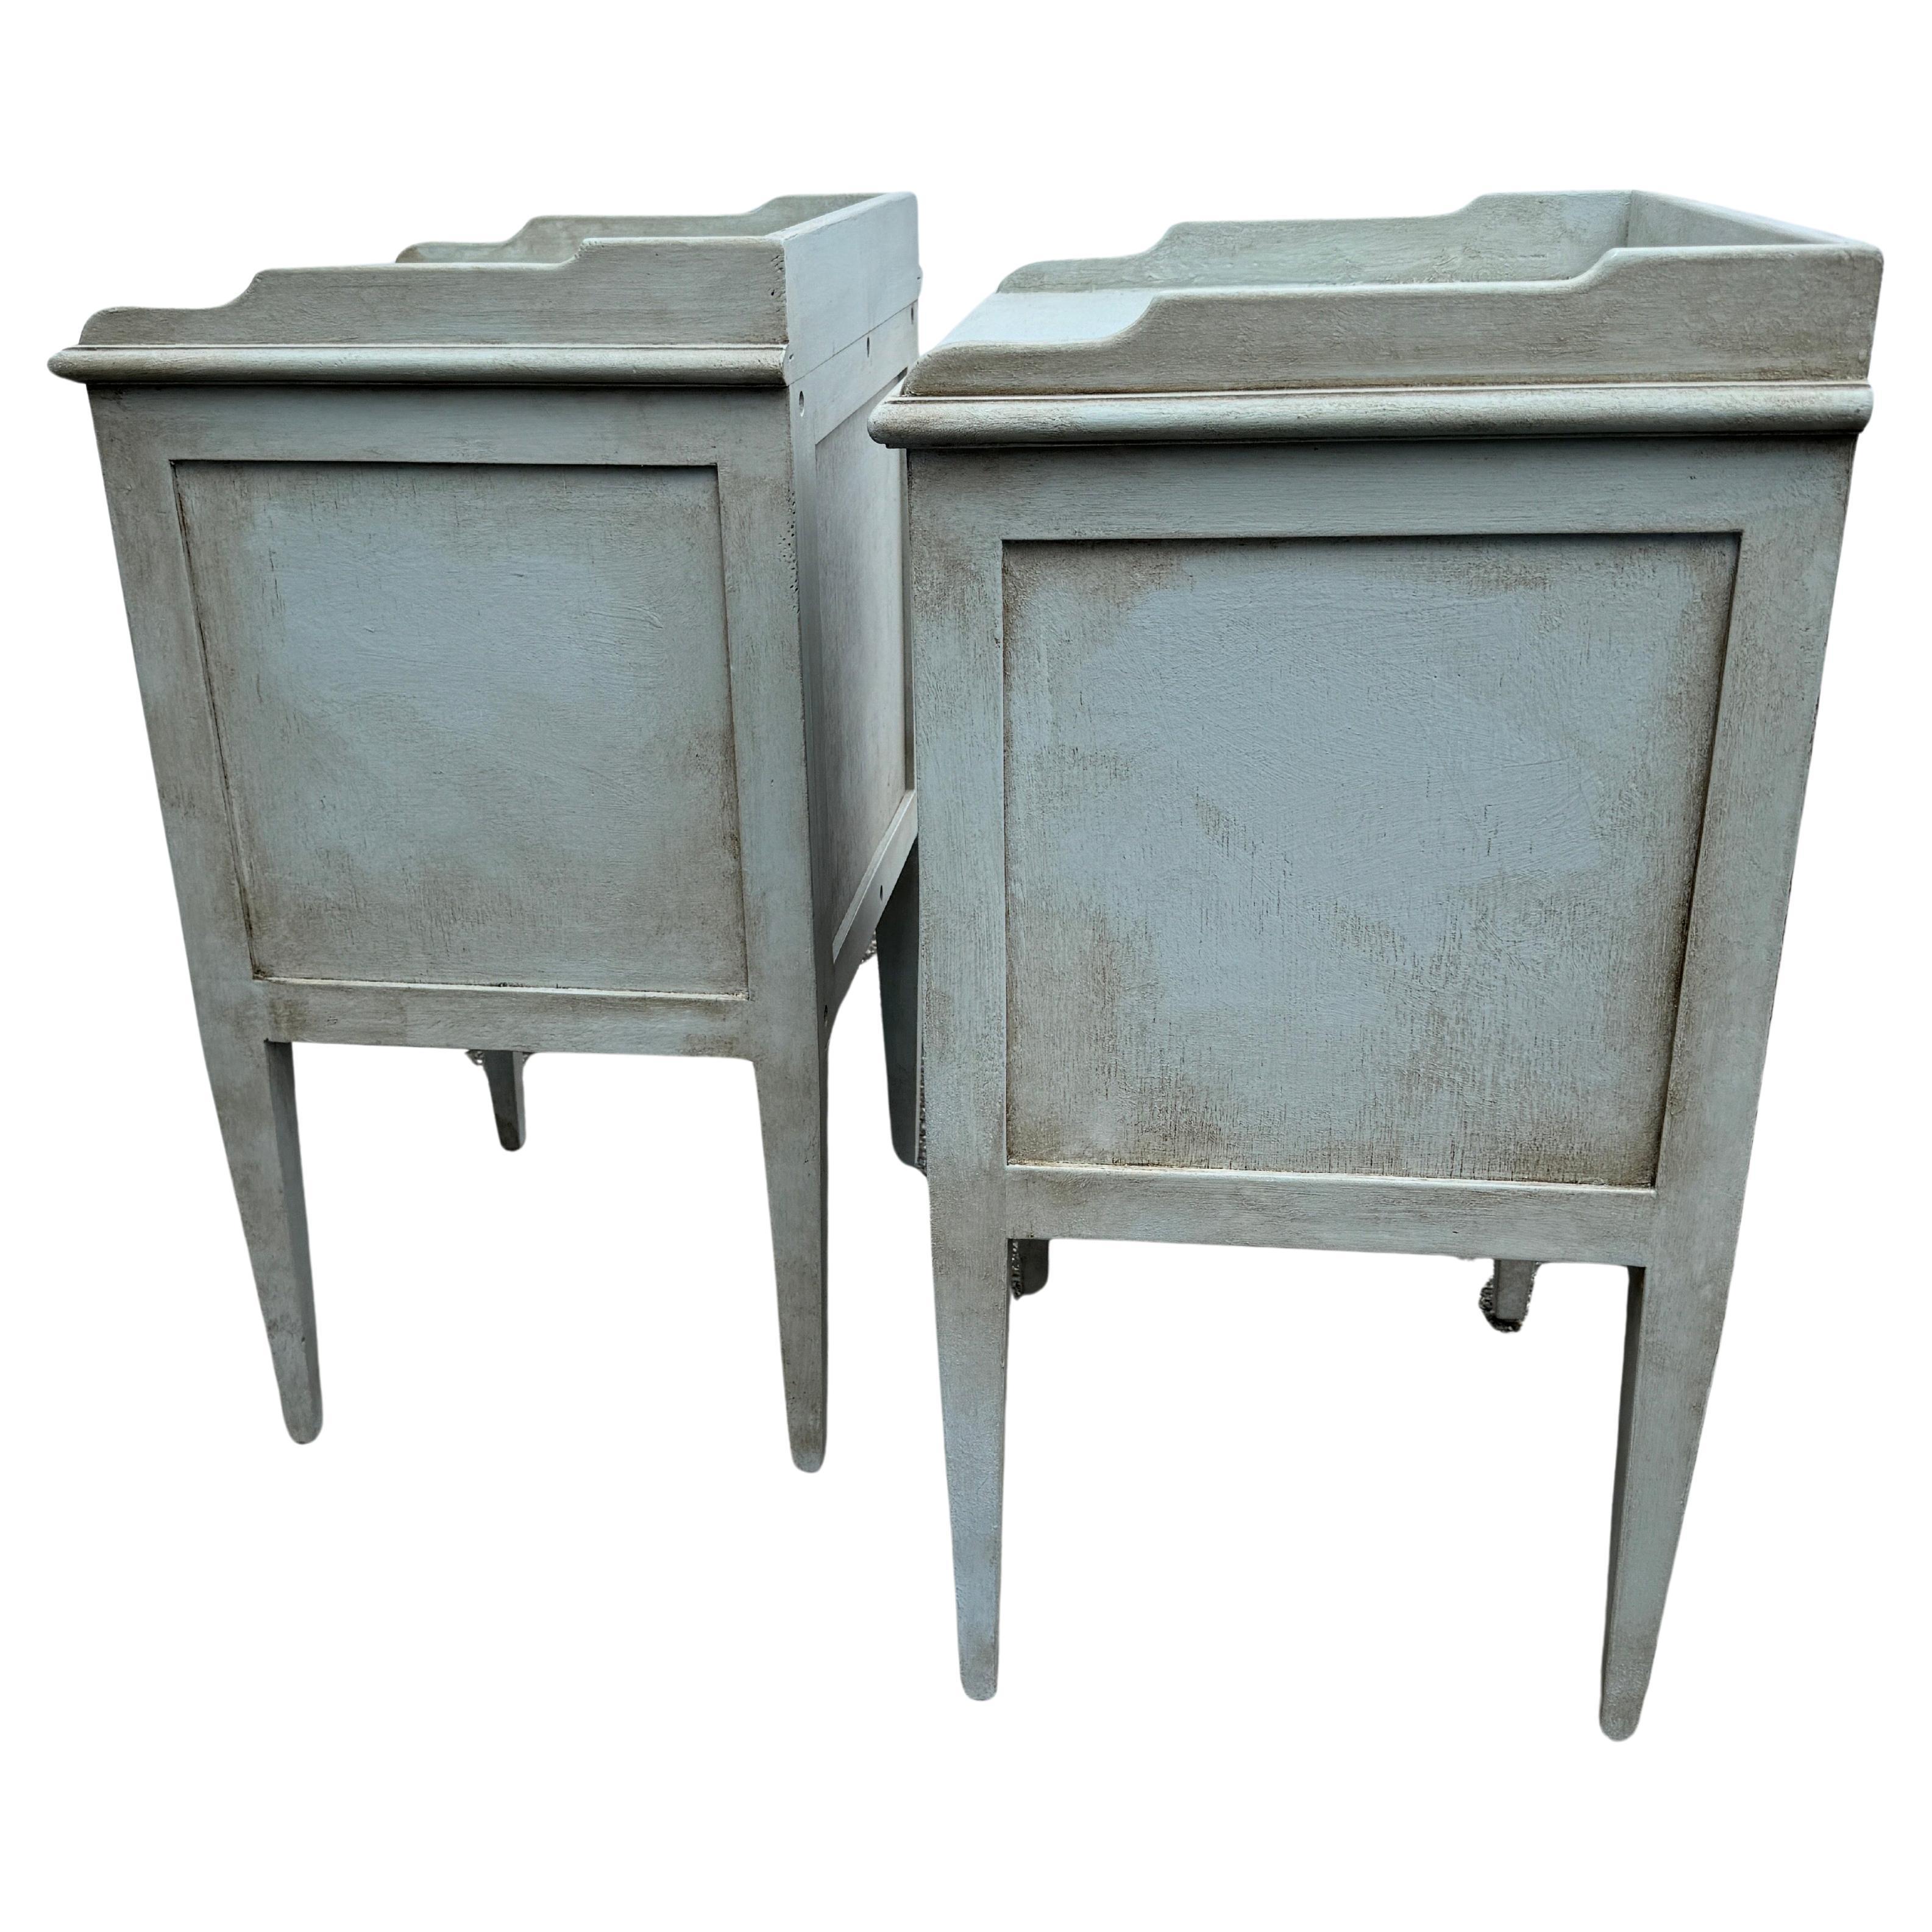 Pair of Swedish Gustavian Style Painted Side Tables Bedside In Good Condition For Sale In Haddonfield, NJ